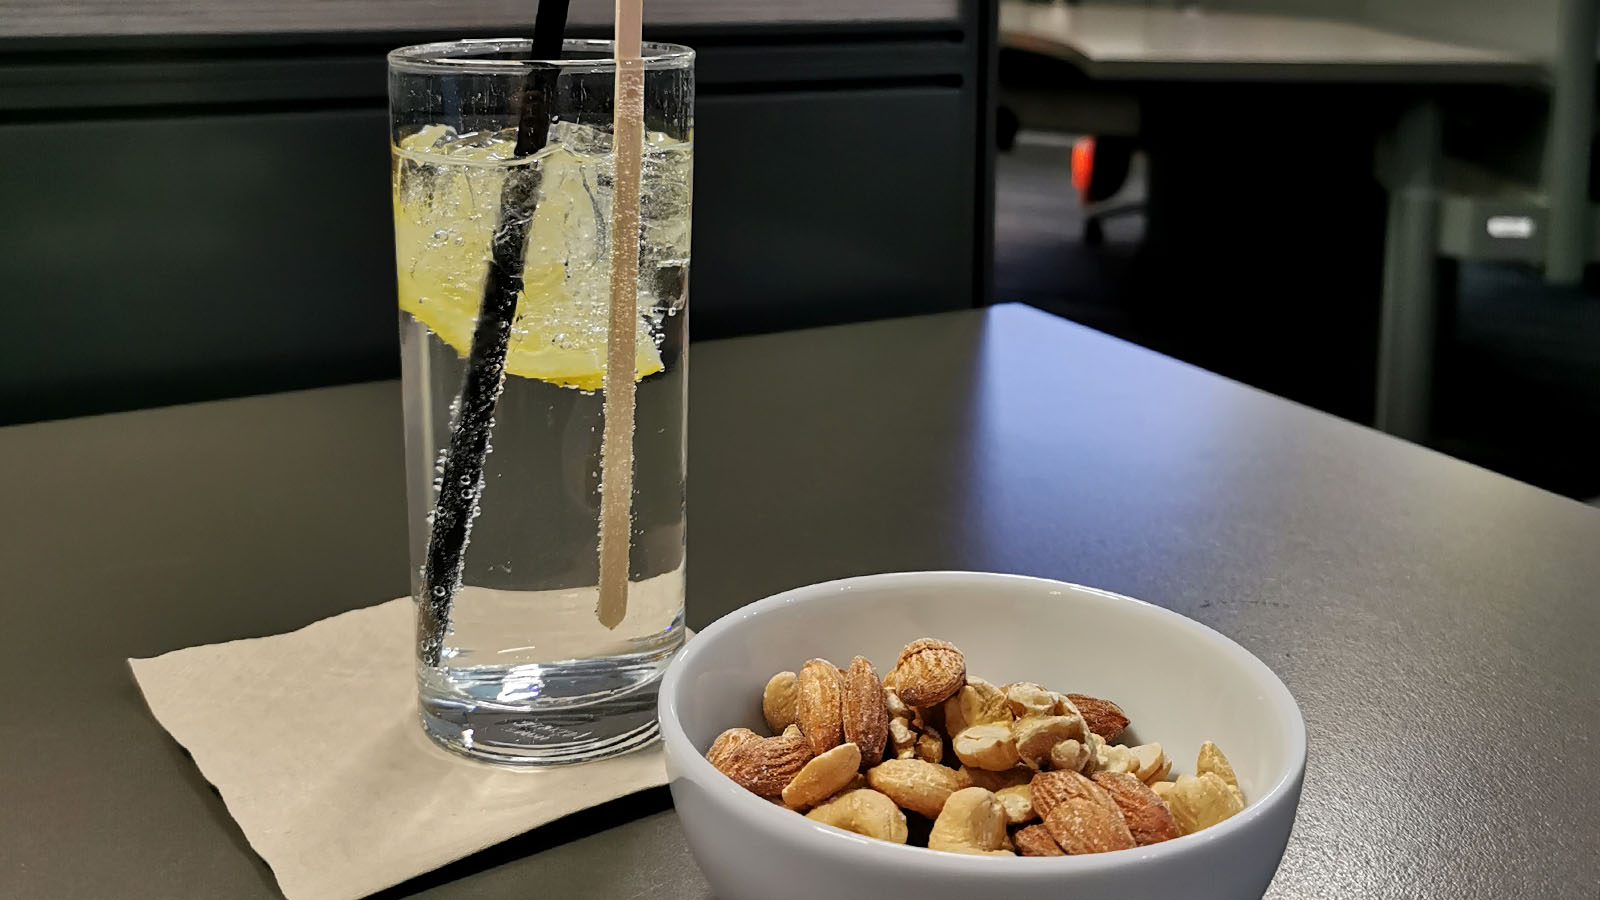 Gin and tonic in the Qantas Club, Adelaide